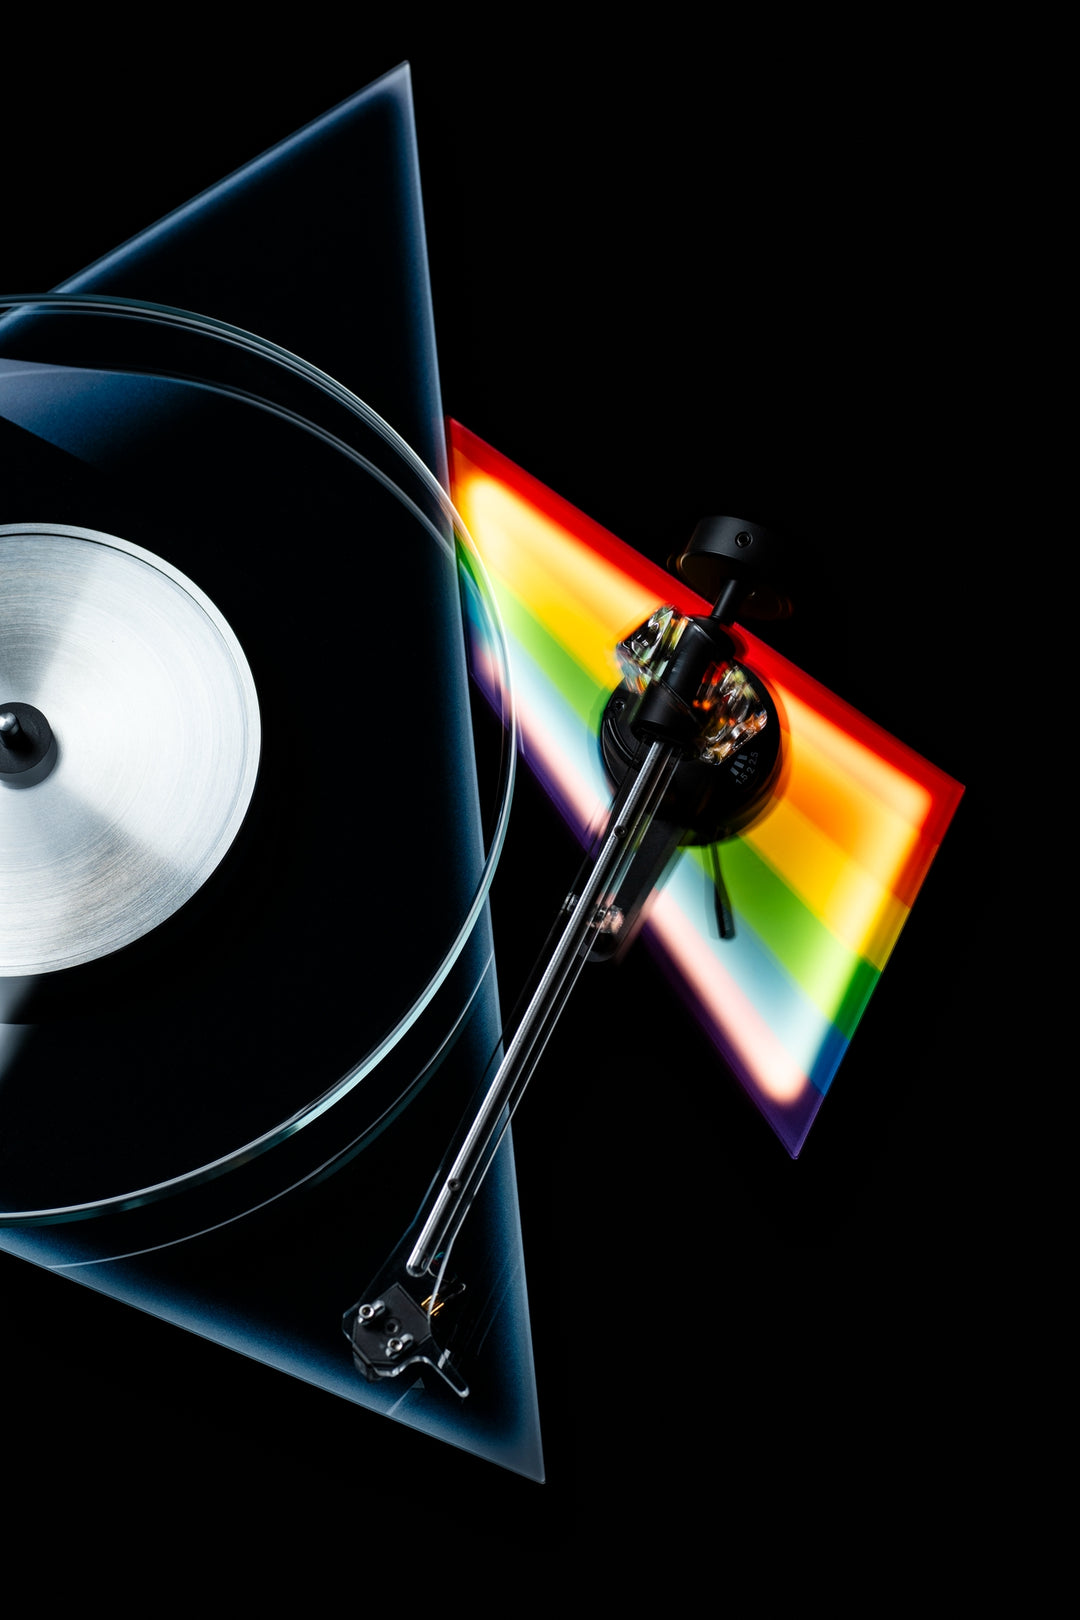 Pro-Ject Dark Side Of The Moon Turntable